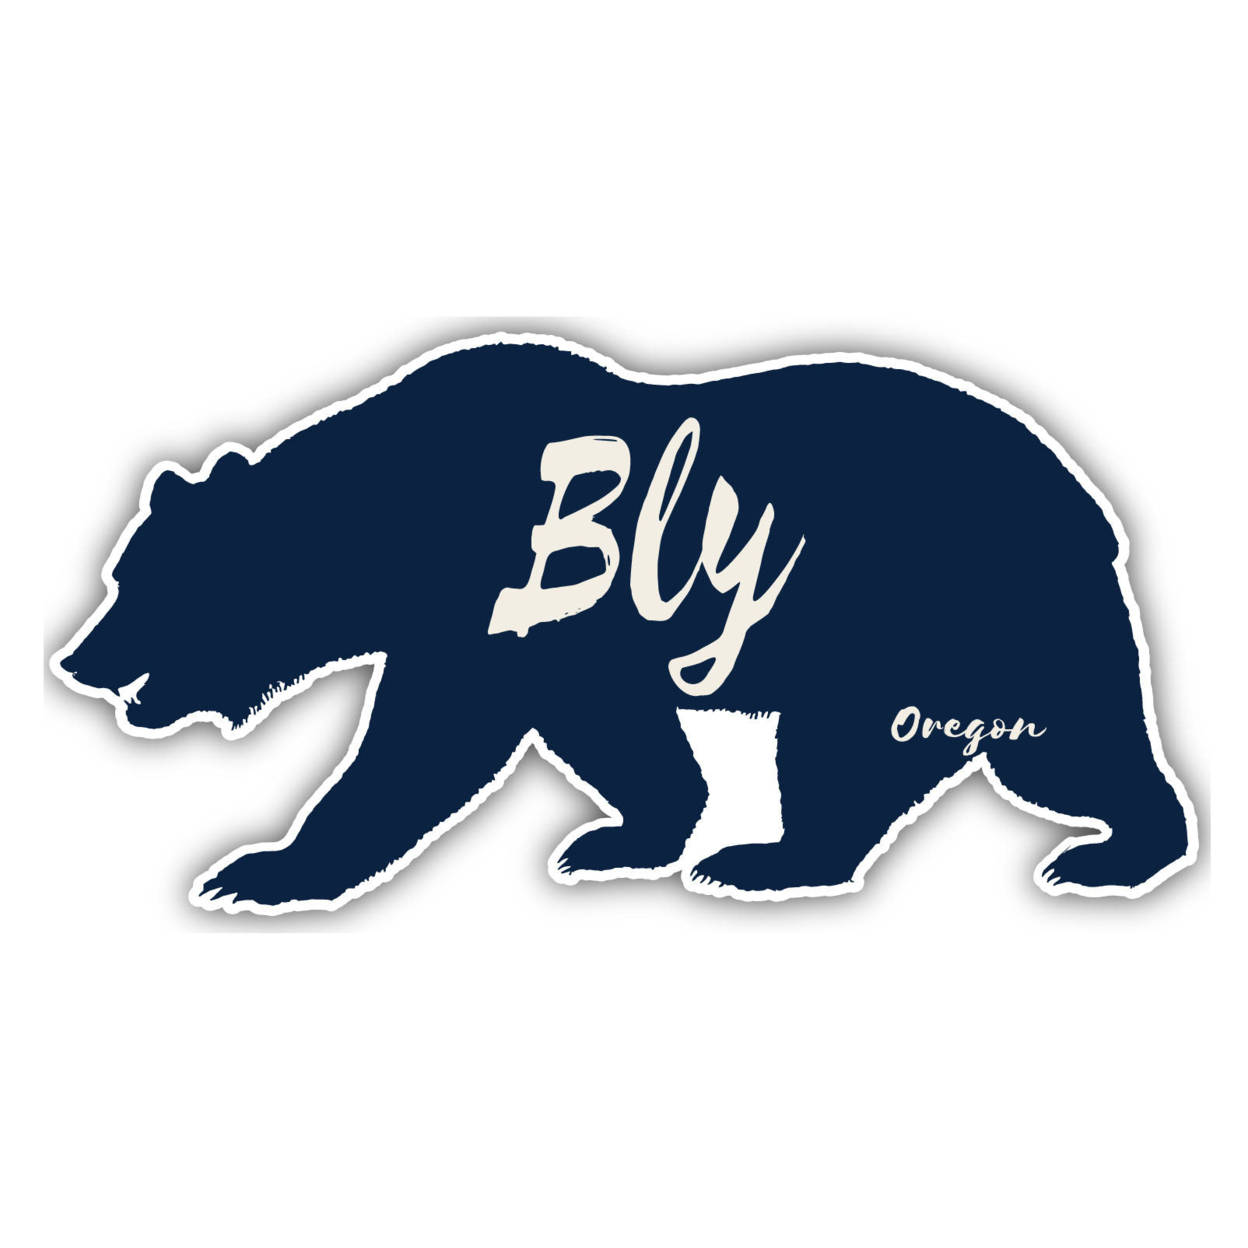 Bly Oregon Souvenir Decorative Stickers (Choose Theme And Size) - 4-Pack, 8-Inch, Bear